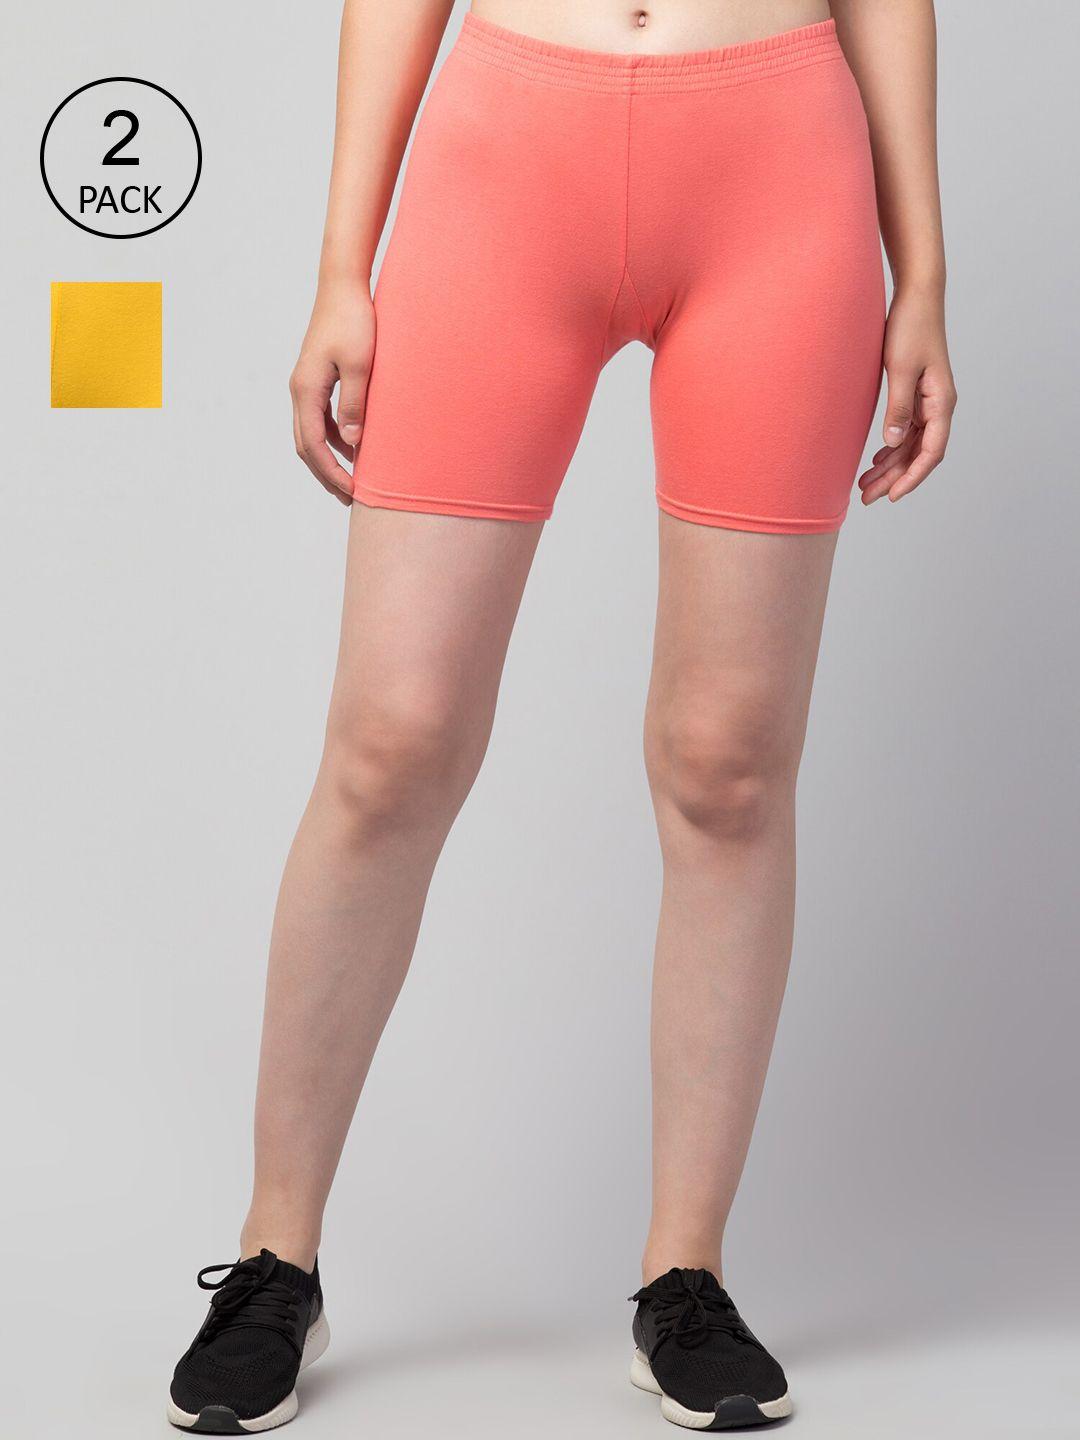 apraa & parma women pack of 2 yellow and peach cotton cycling sports shorts